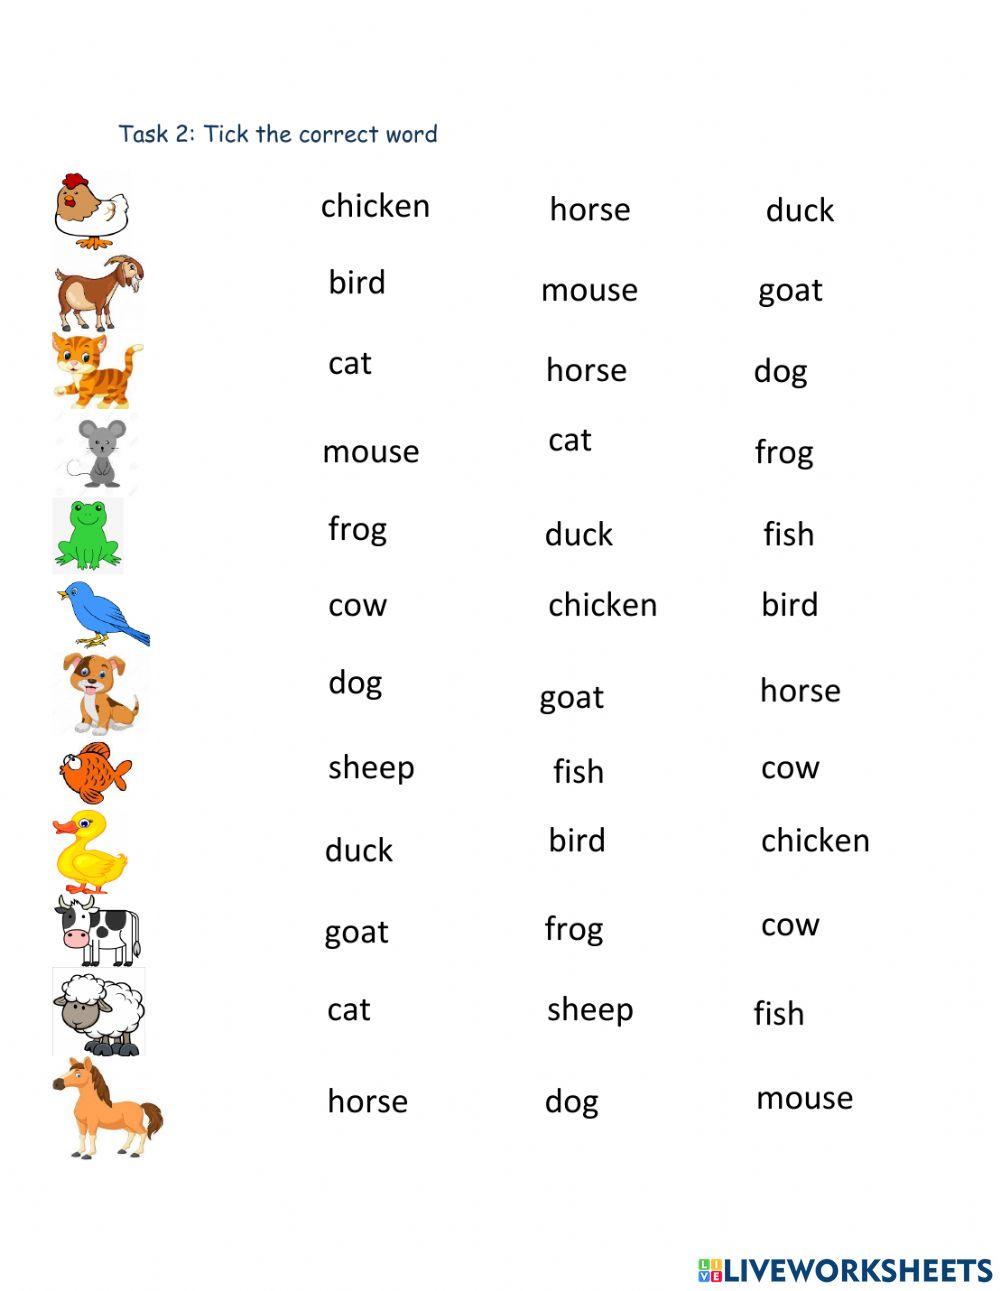 Review Animals